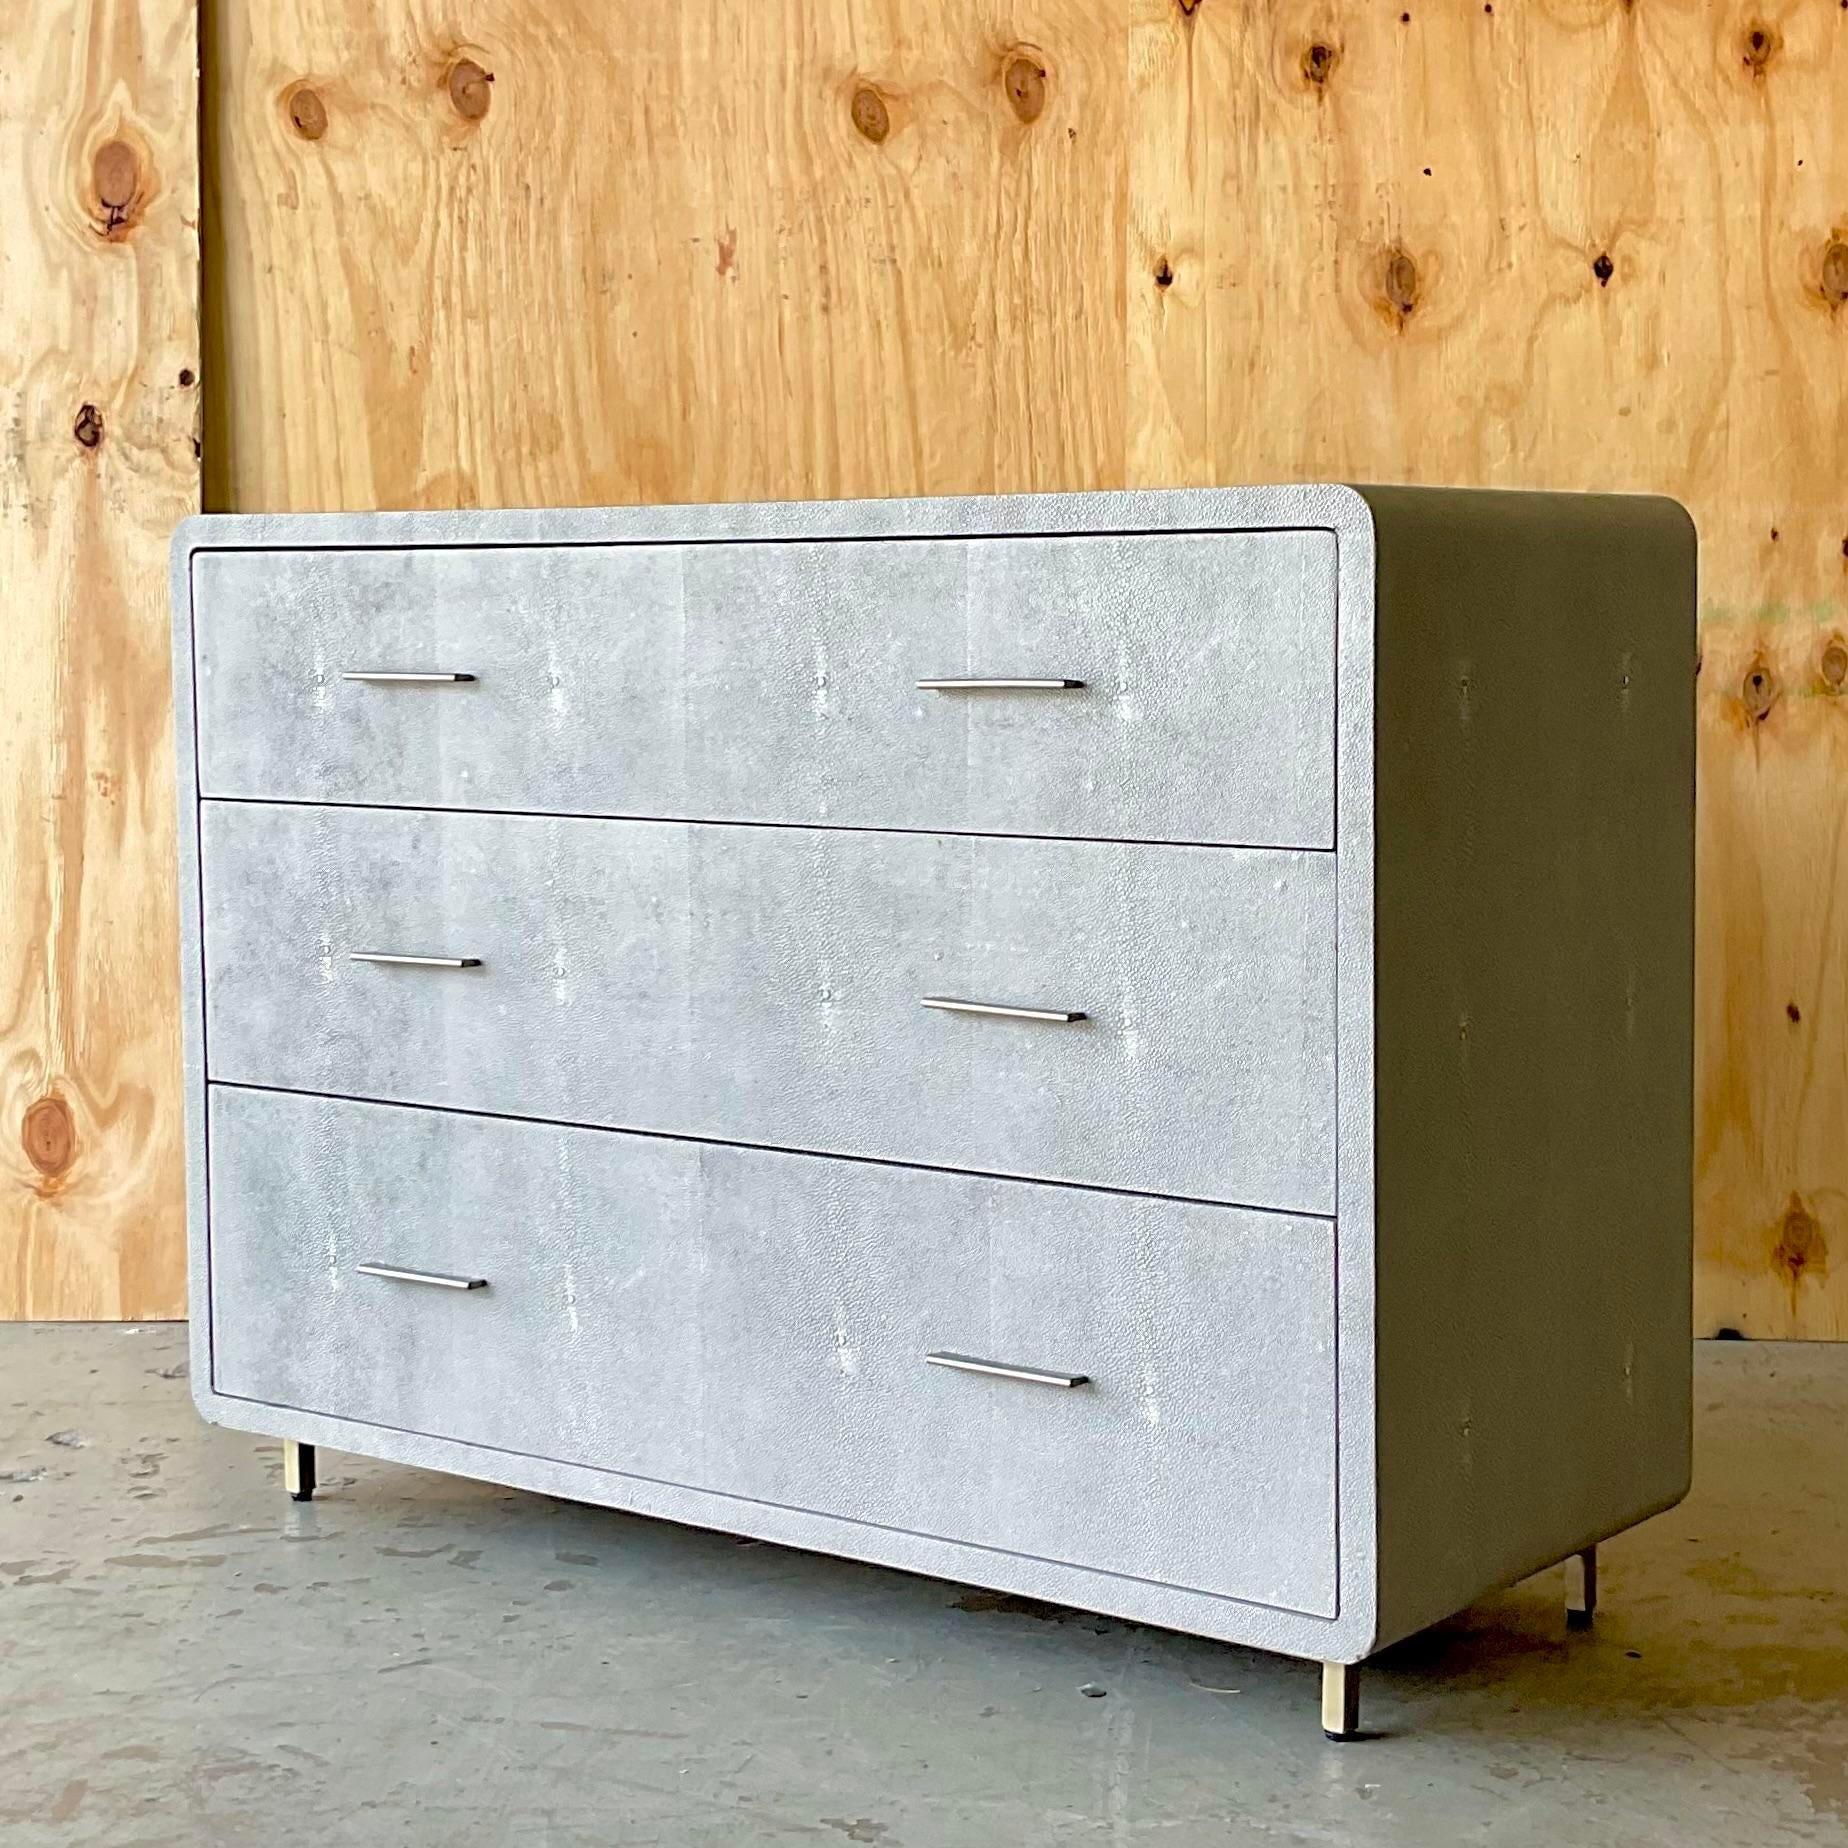 A fantastic vintage Contemporary chest of drawers. Made by the Interlude group and marked inside in the top drawer. A beautiful faux Shagreen wrapped cabinet with brushed chrome pulls. Two chests available if a pair is needed. Acquired from a Palm